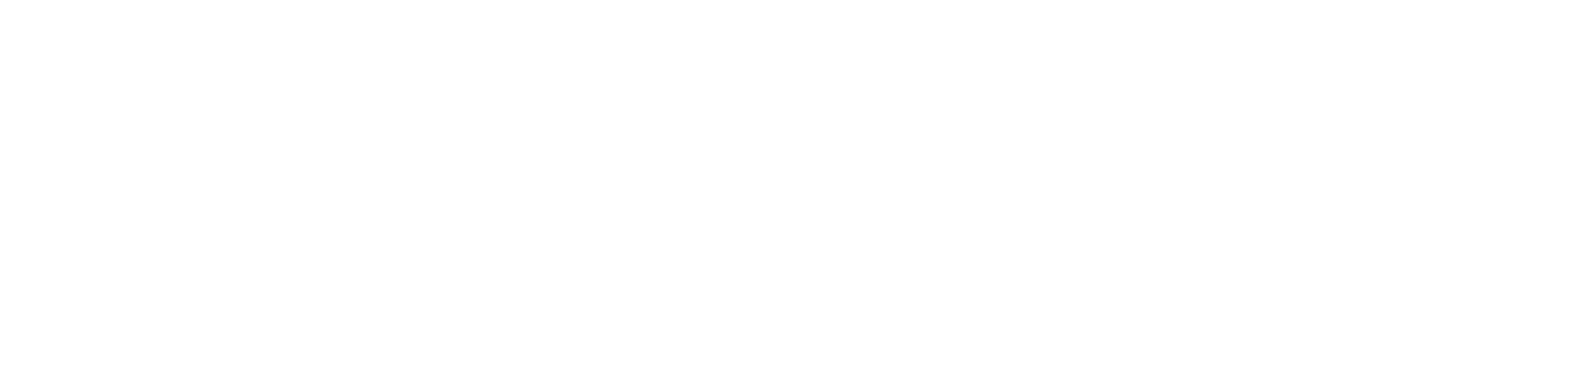 Staples Business Advantage Logo - Staples Logo Png (96+ images in Collection) Page 3